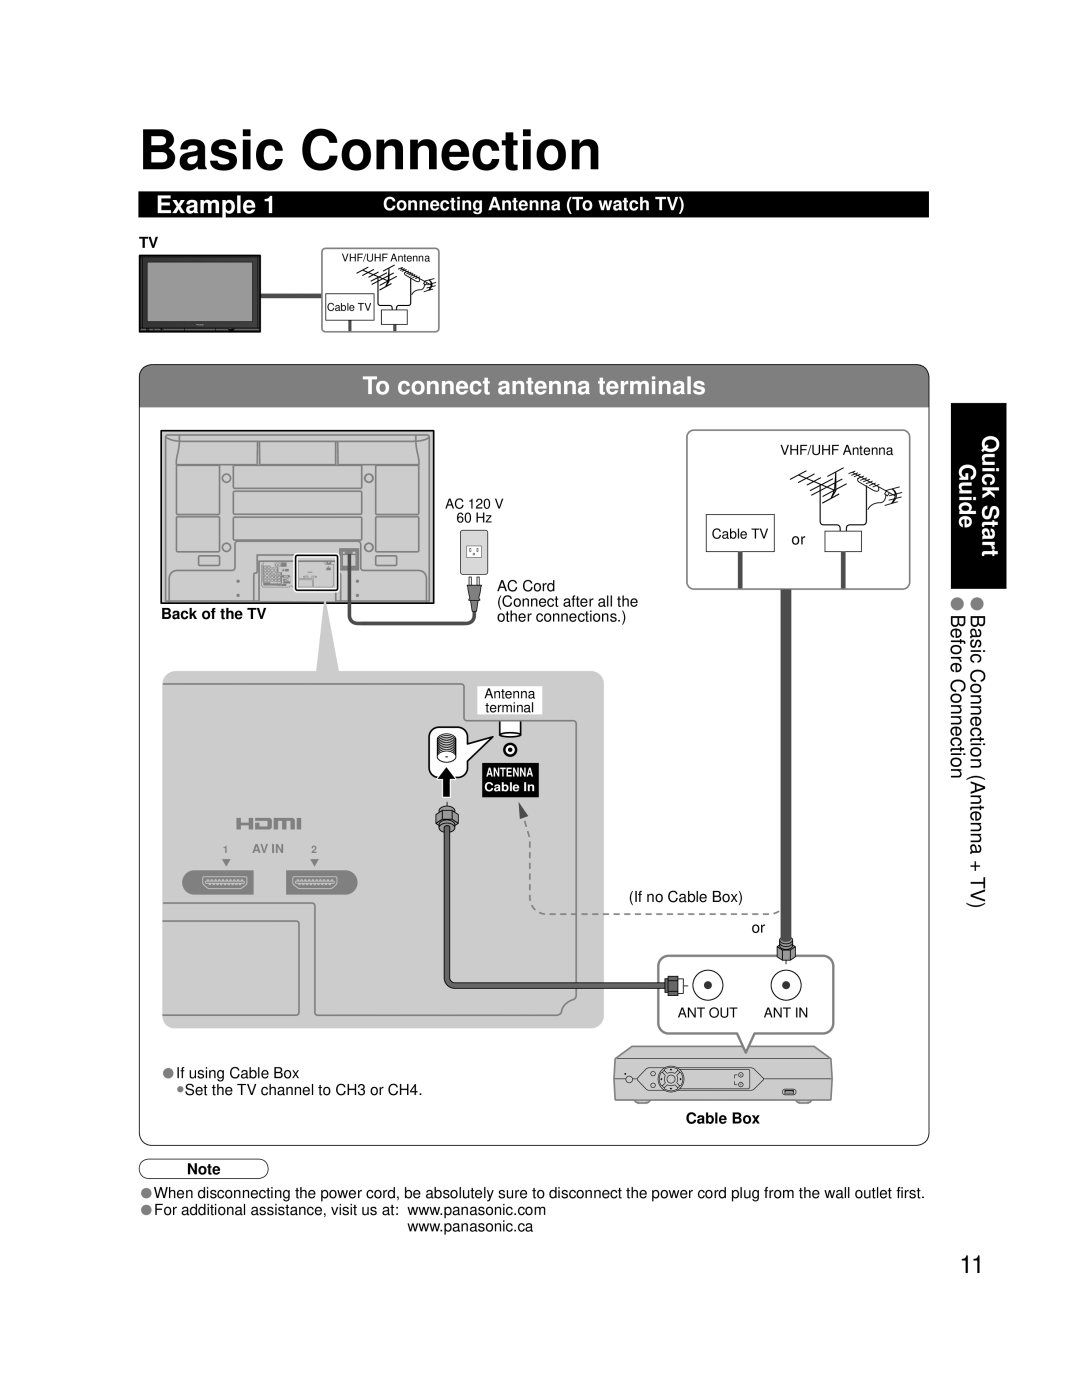 Panasonic TH 50PZ700U Basic Connection, Example, To connect antenna terminals, Connecting Antenna To watch TV, Cable Box 